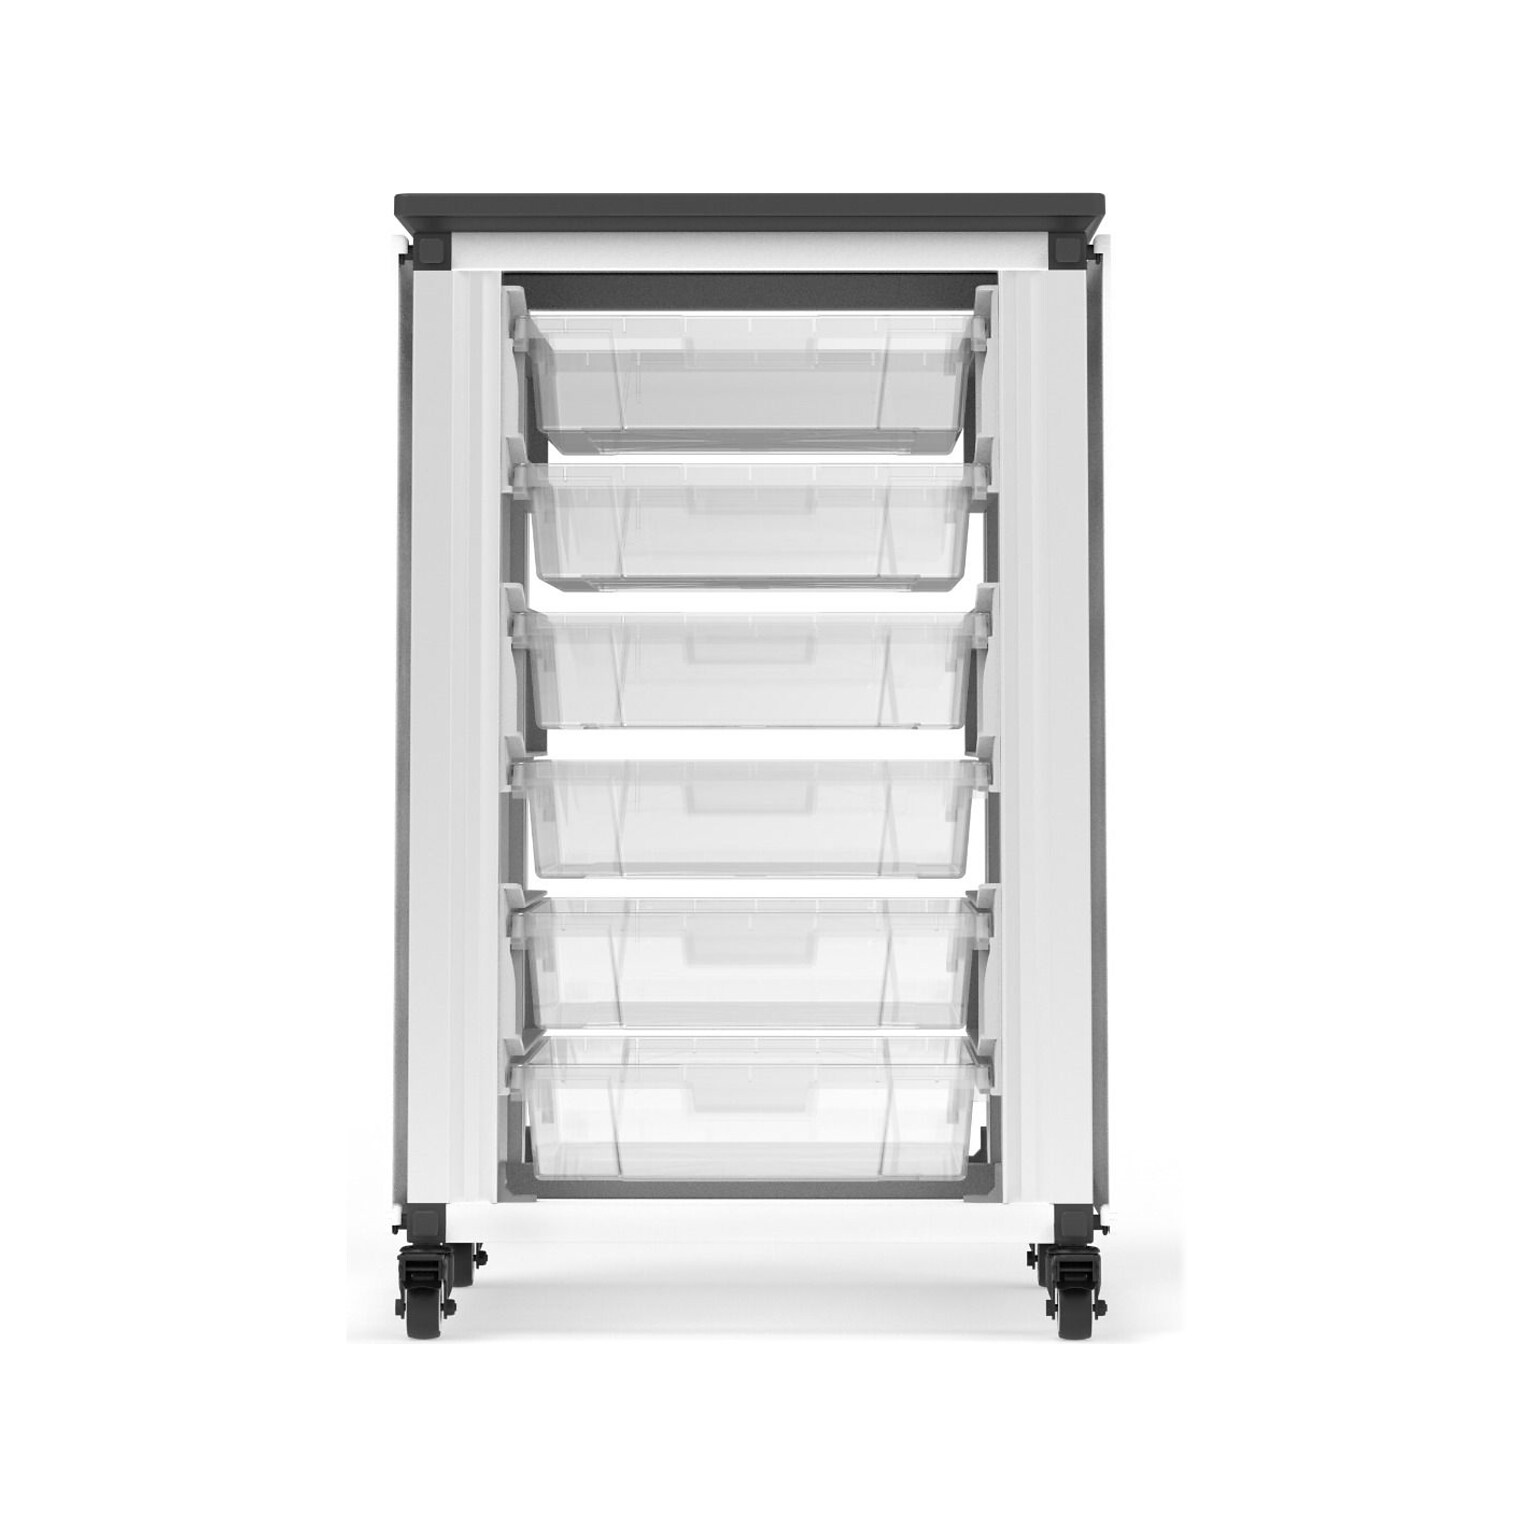 Luxor Mobile 6-Section Modular Classroom Storage Cabinet, 28.75H x 18.2W x 18.2D, White (MBS-STR-11-6S)